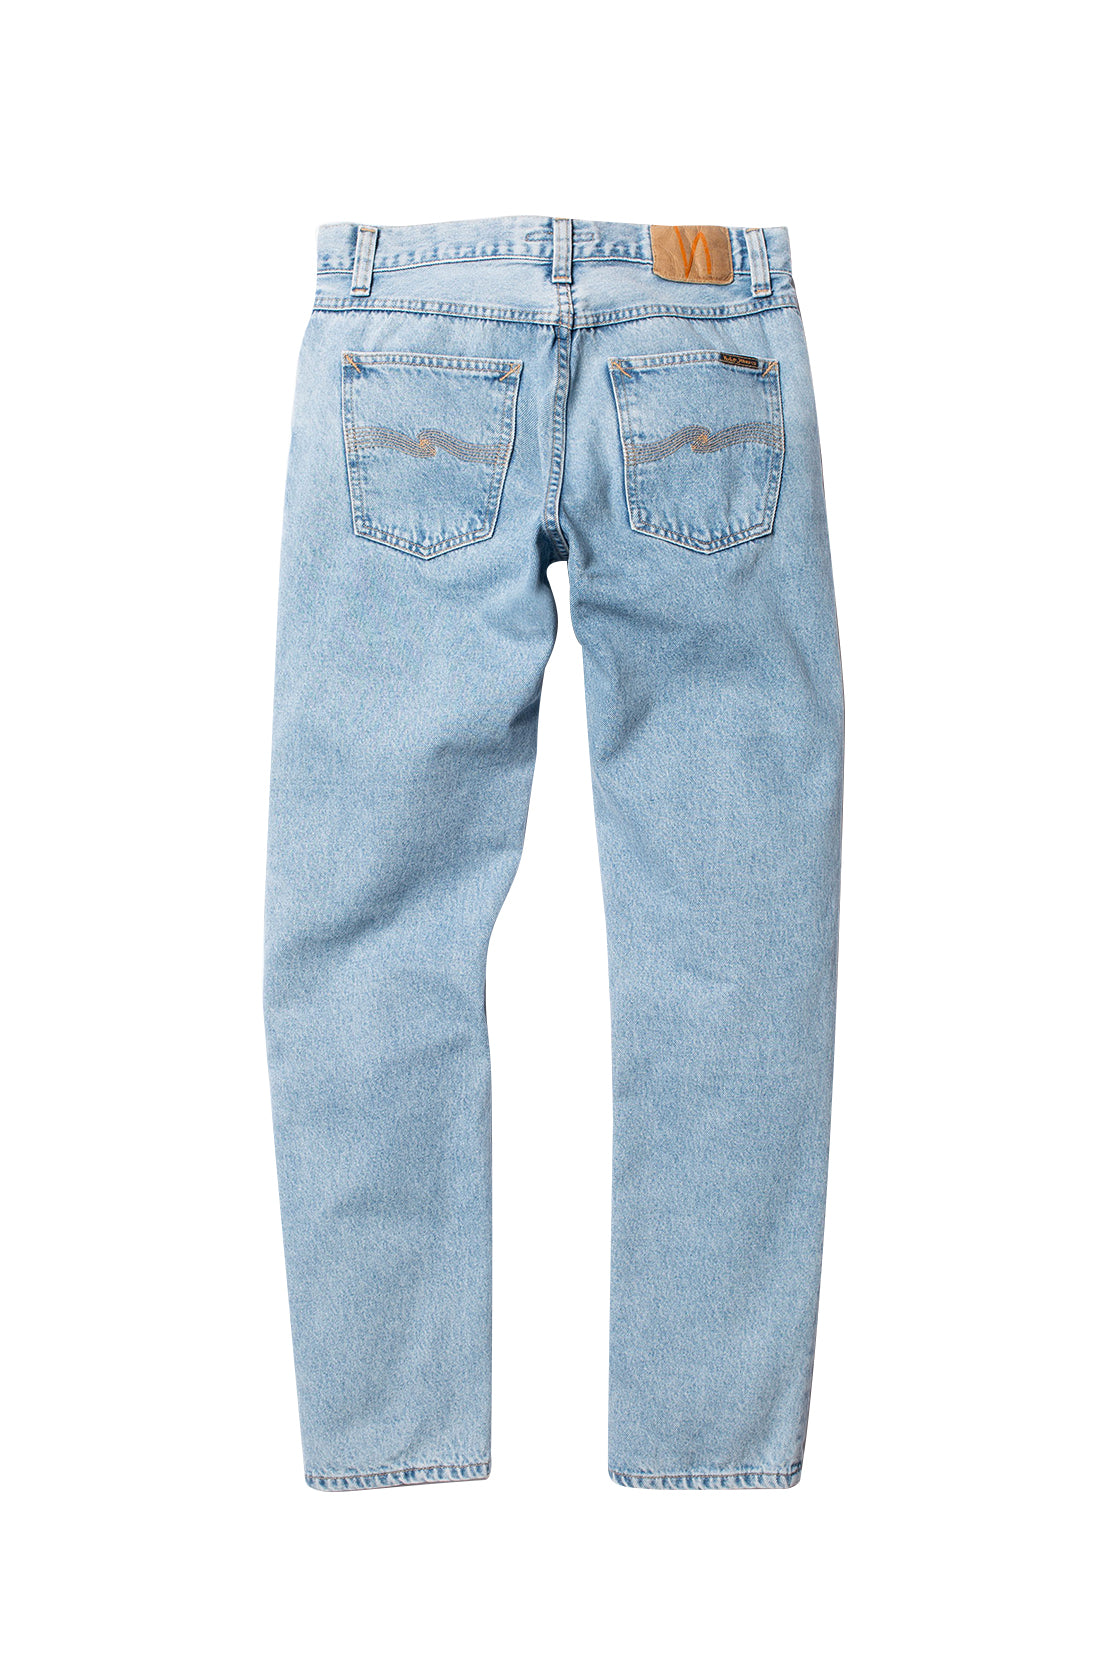 Nudie Jeans Gritty Jackson Jean L32 Sunny Blue